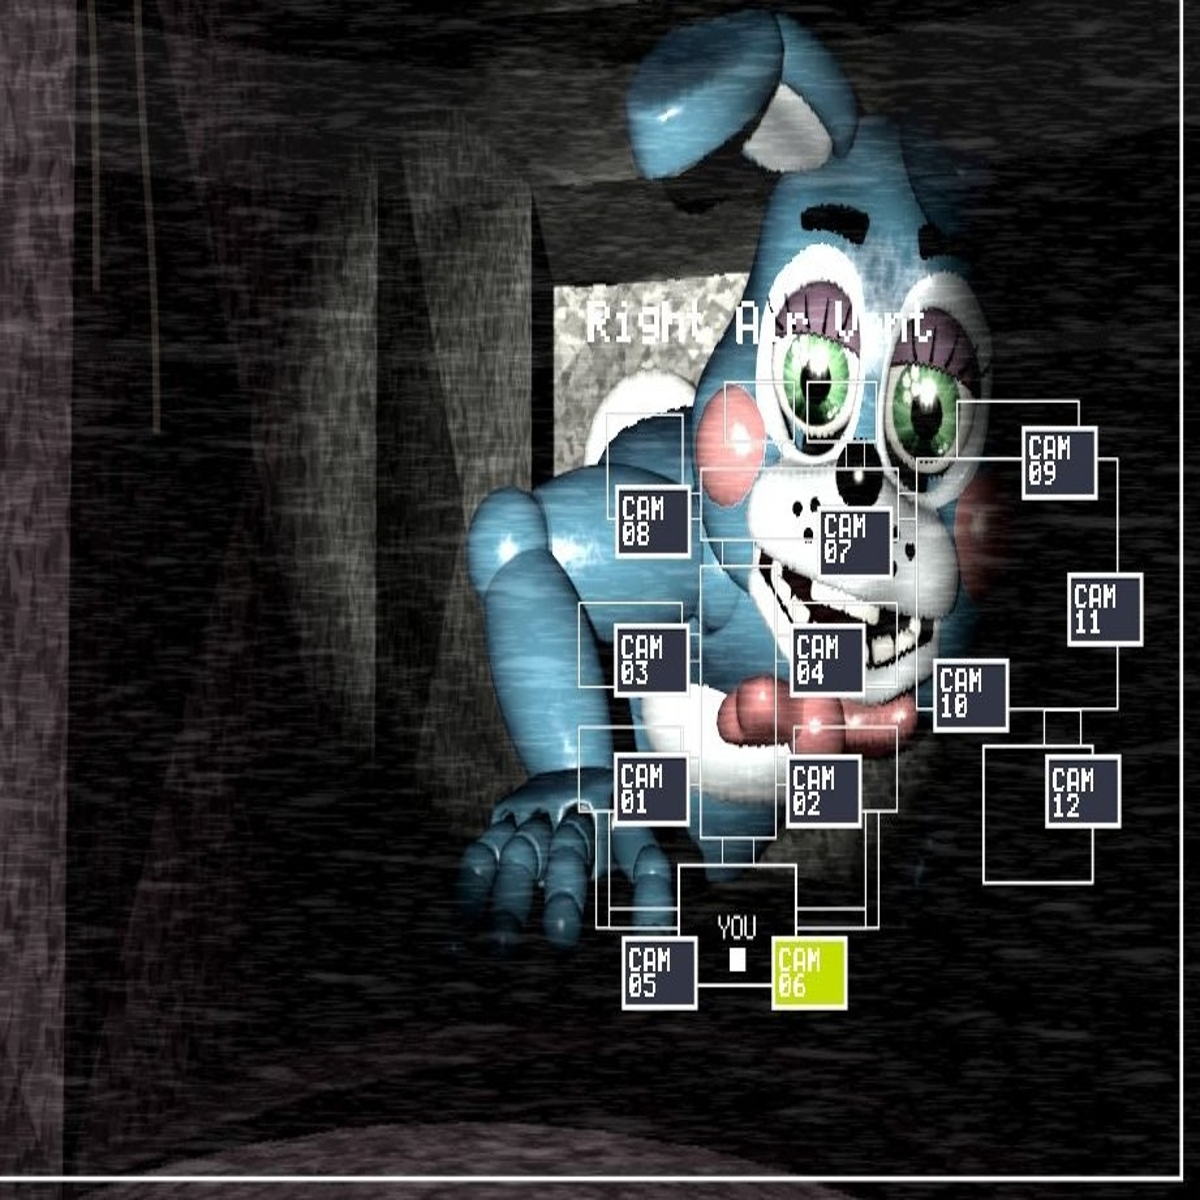 Steam Community :: Guide :: FNaF 2 strategy guide